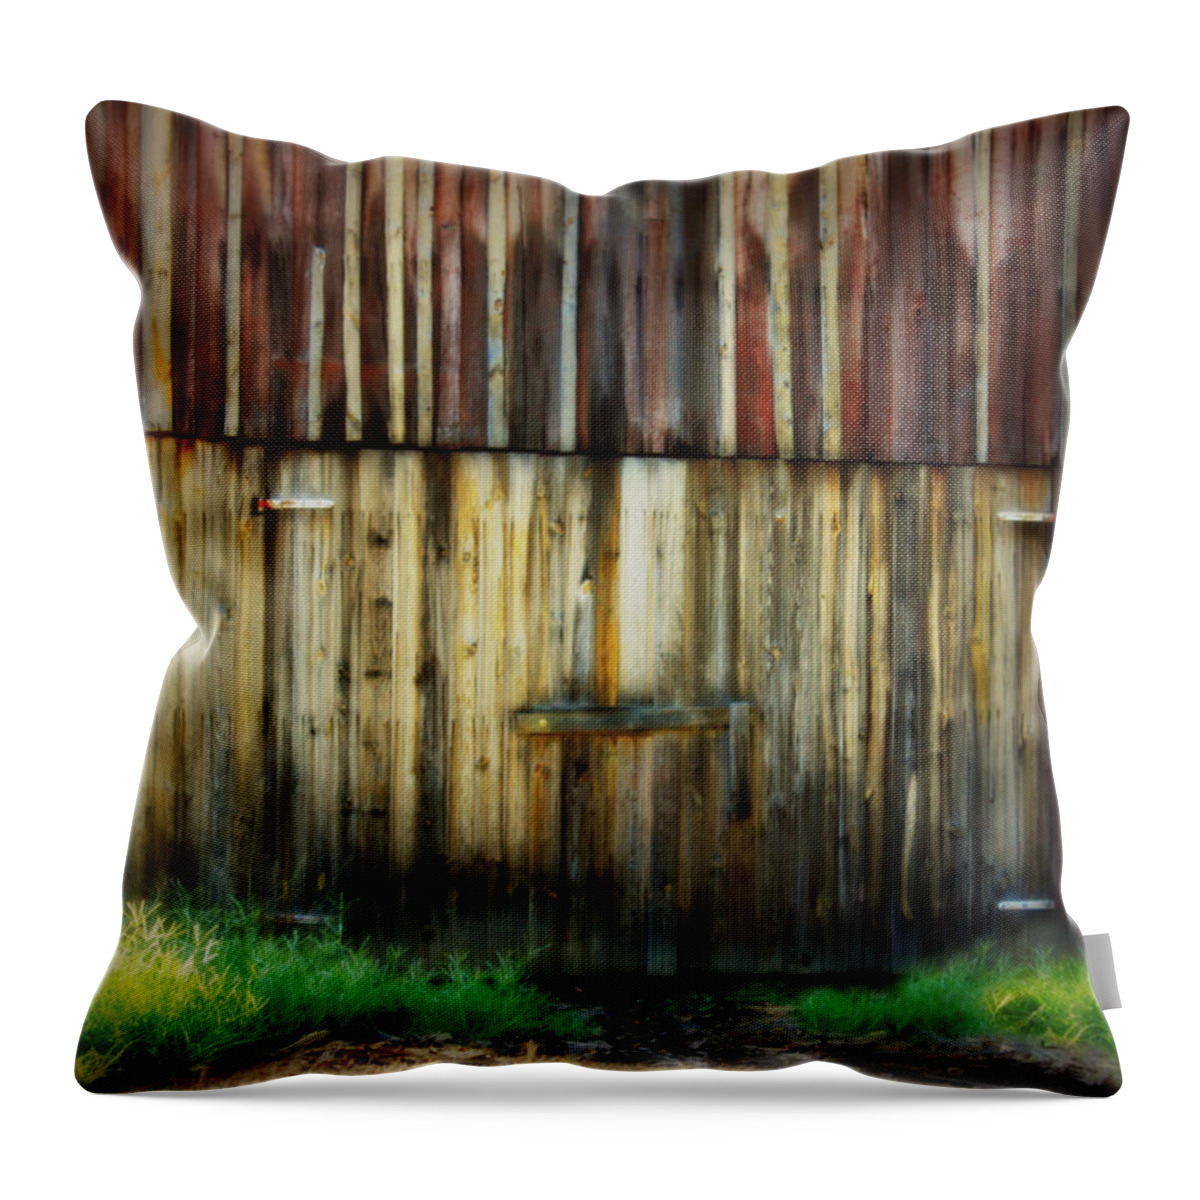 Barn Throw Pillow featuring the photograph All Dressed Up by Julie Hamilton